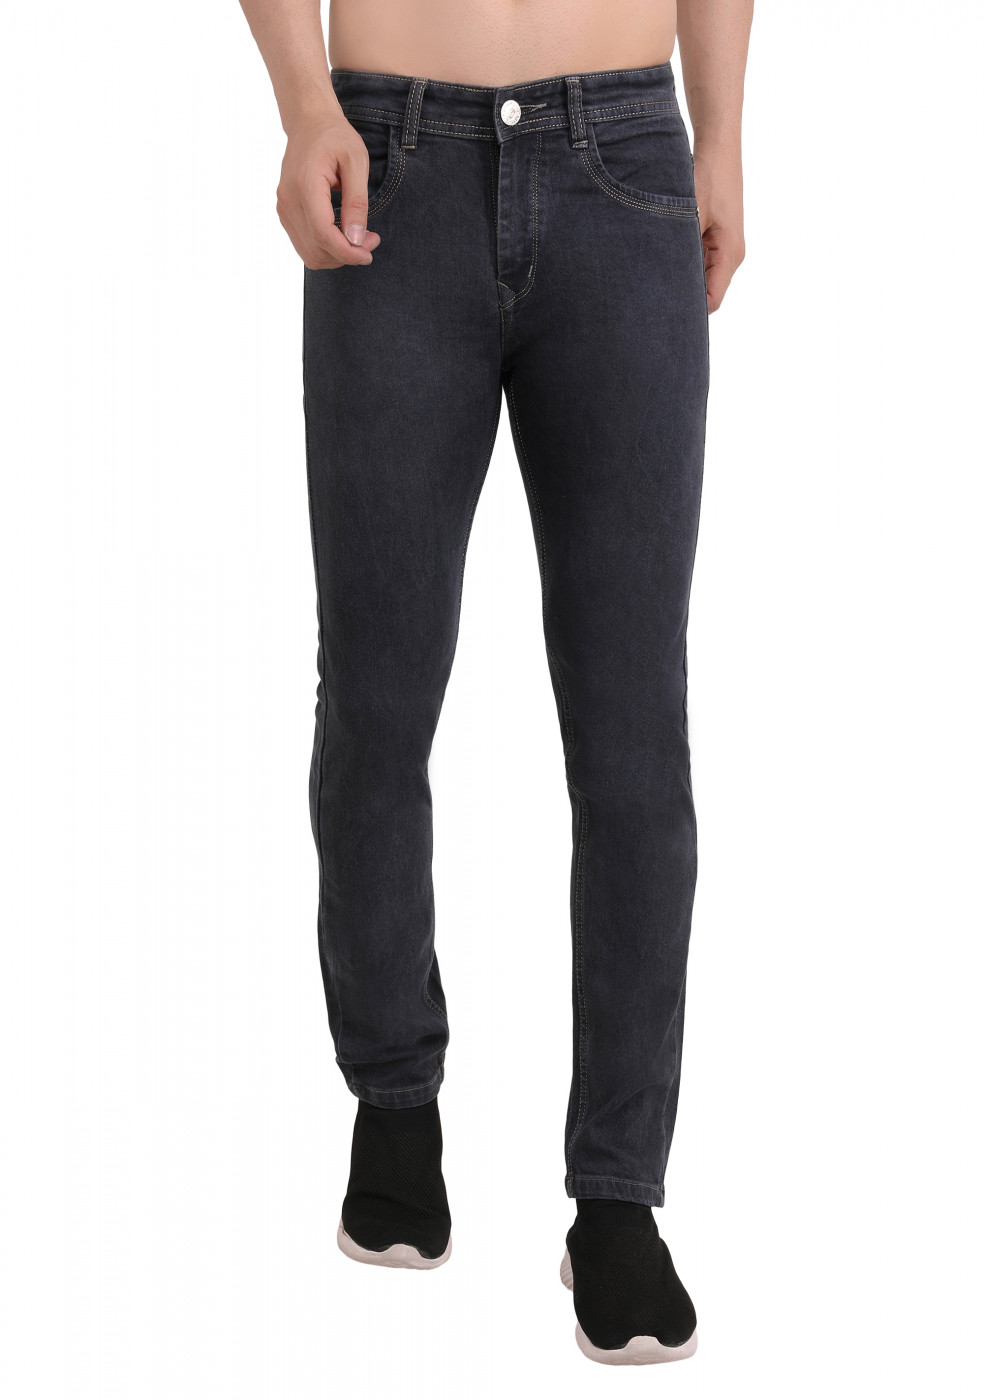 Gray Comfortable Jeans For Men